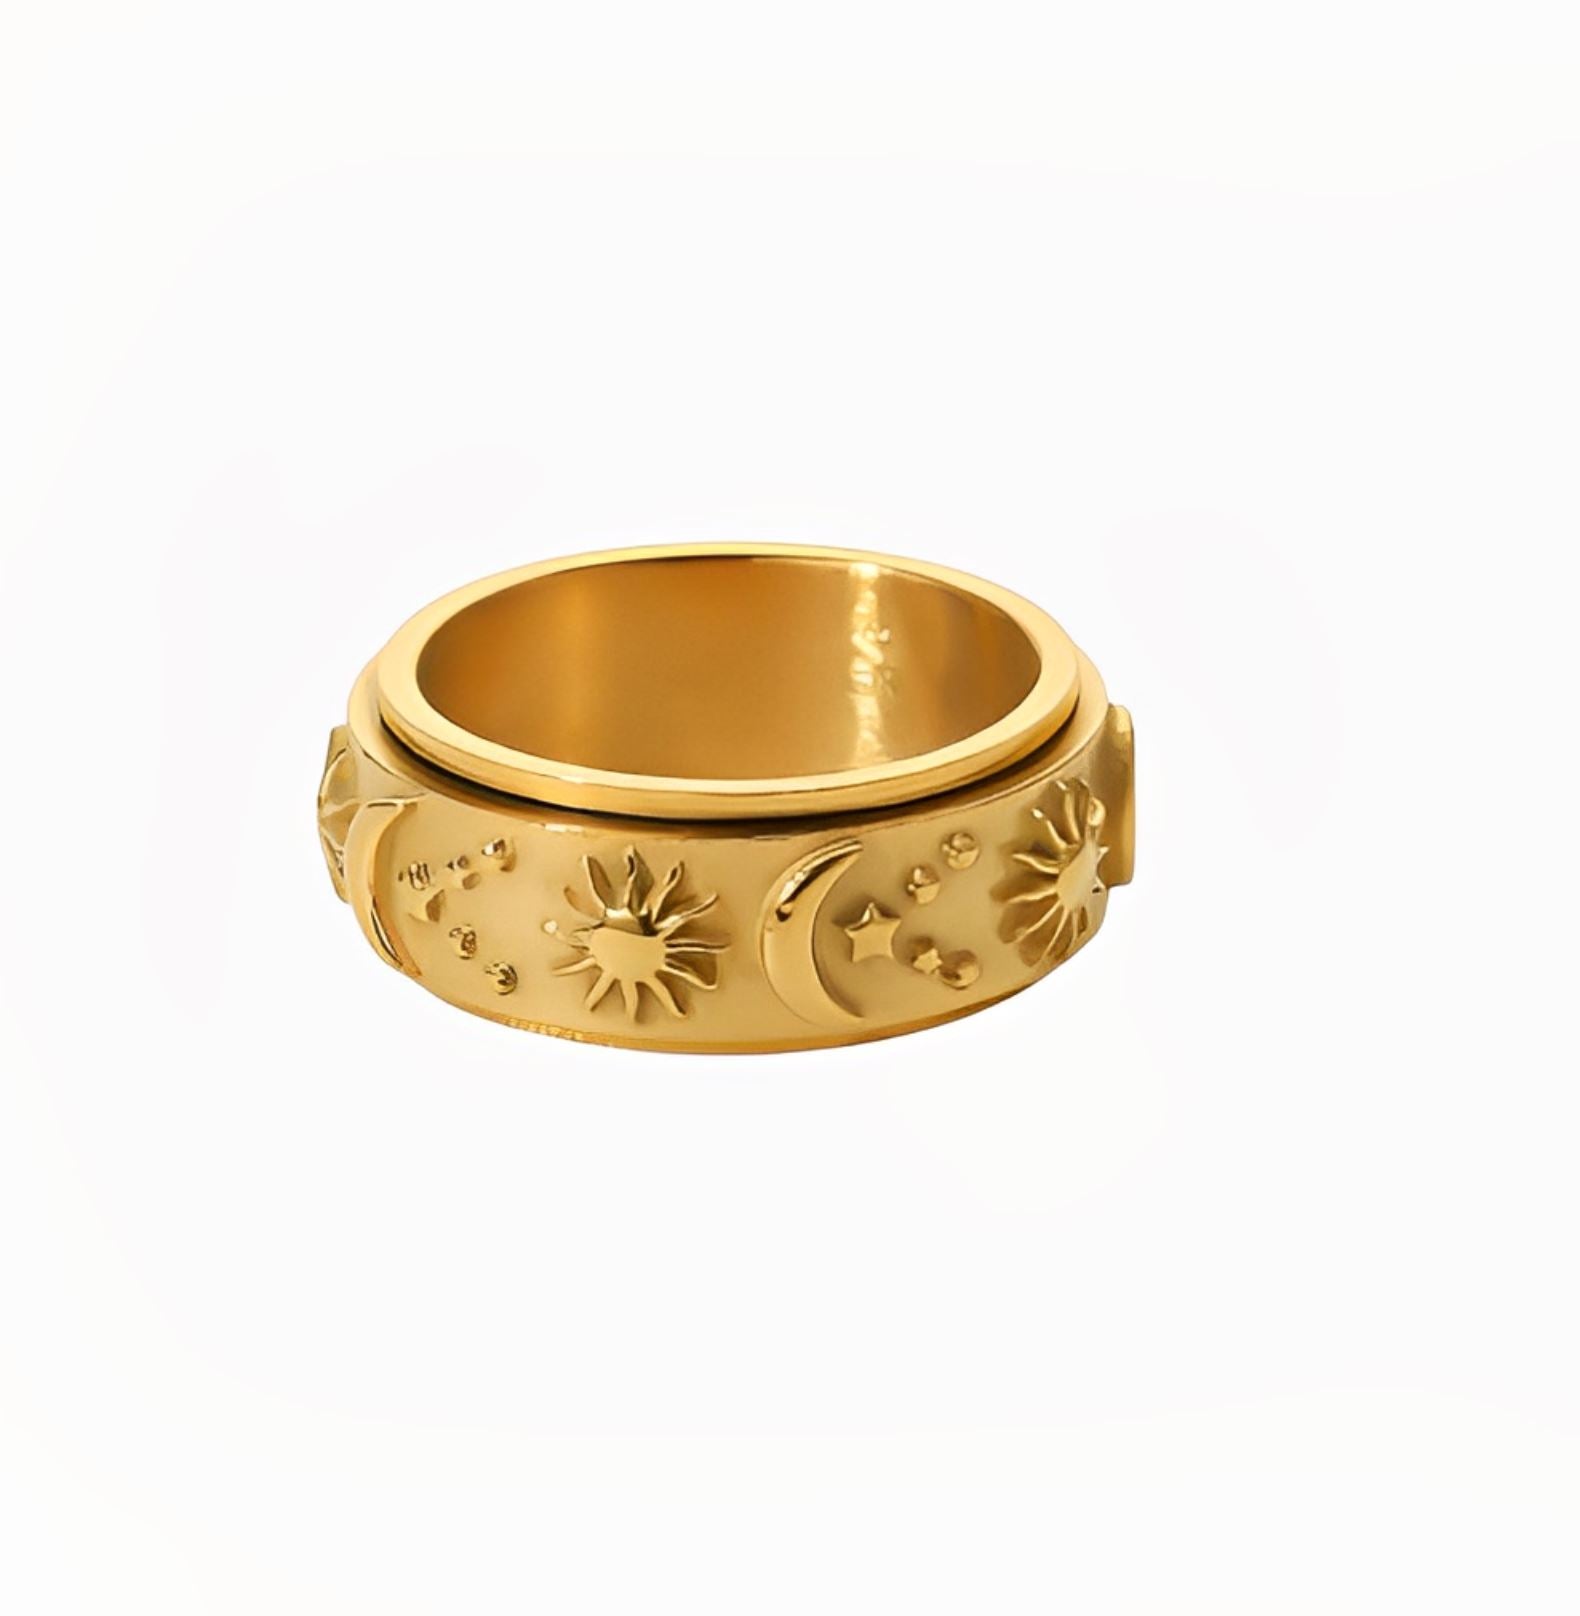 STAR MOON RING - GOLD braclet Yubama Jewelry Online Store - The Elegant Designs of Gold and Silver ! 